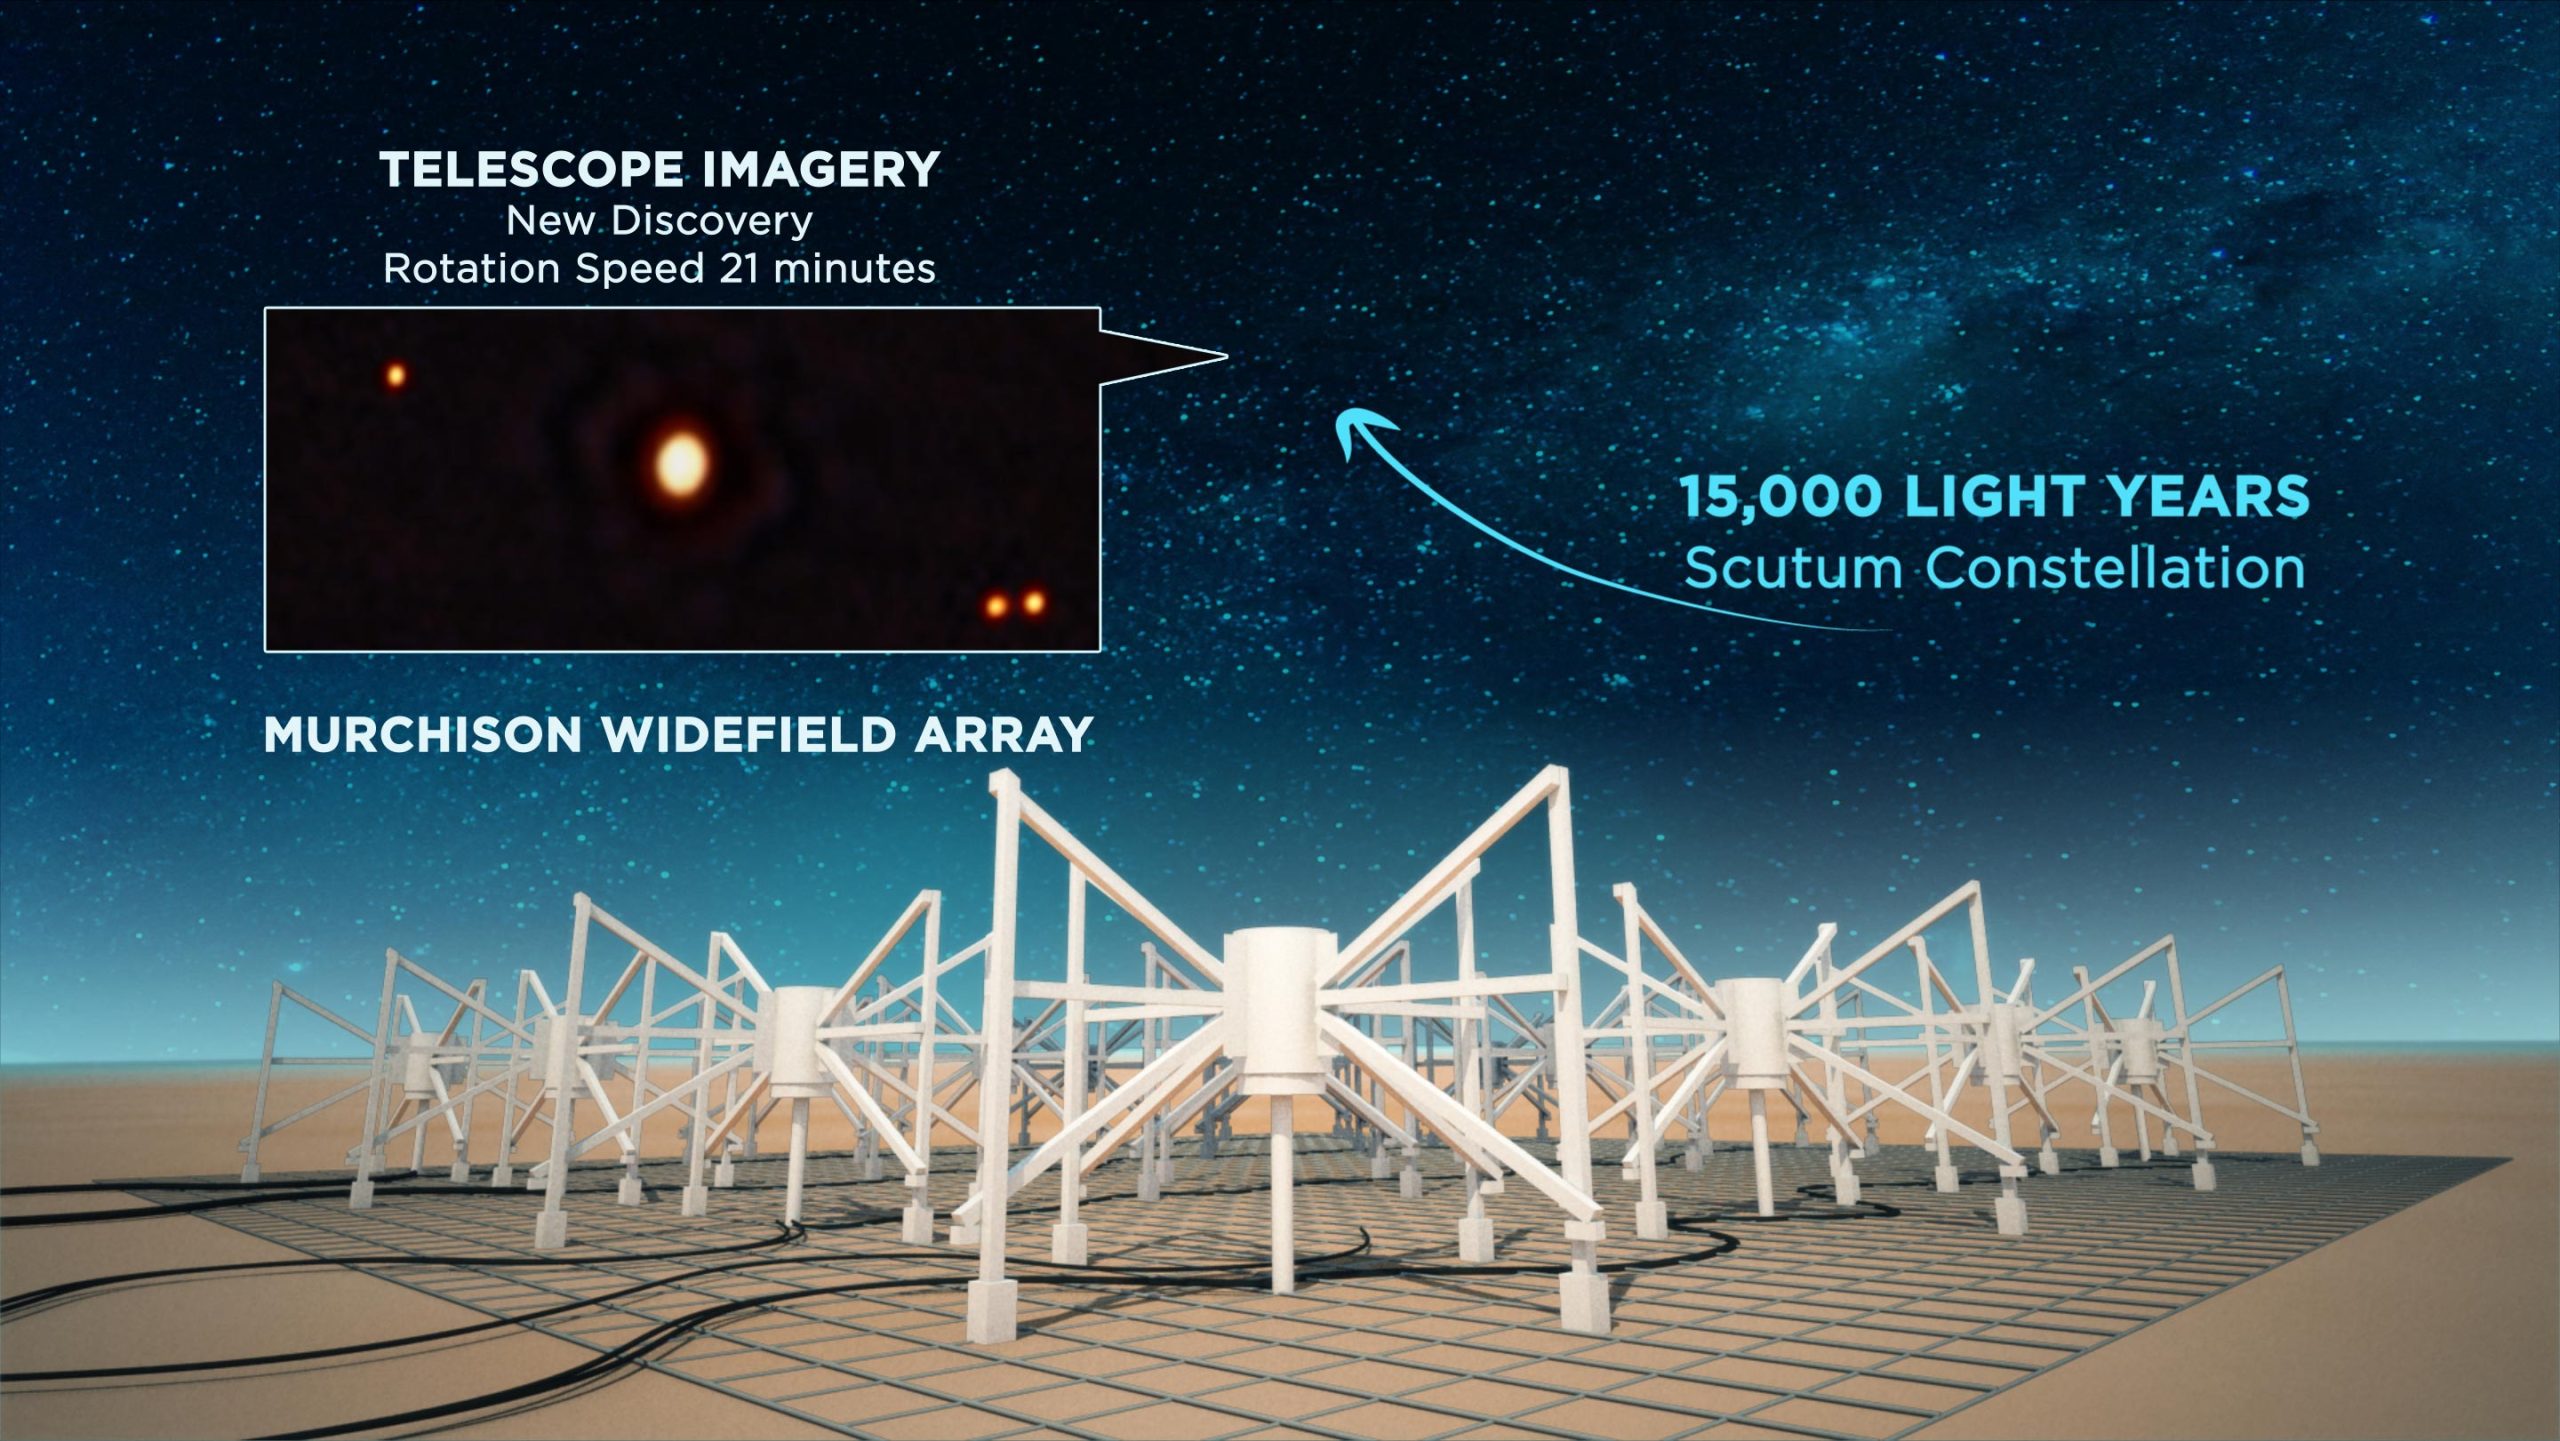 An ultra-long period magnetar?  Max Planck Institute for Radio